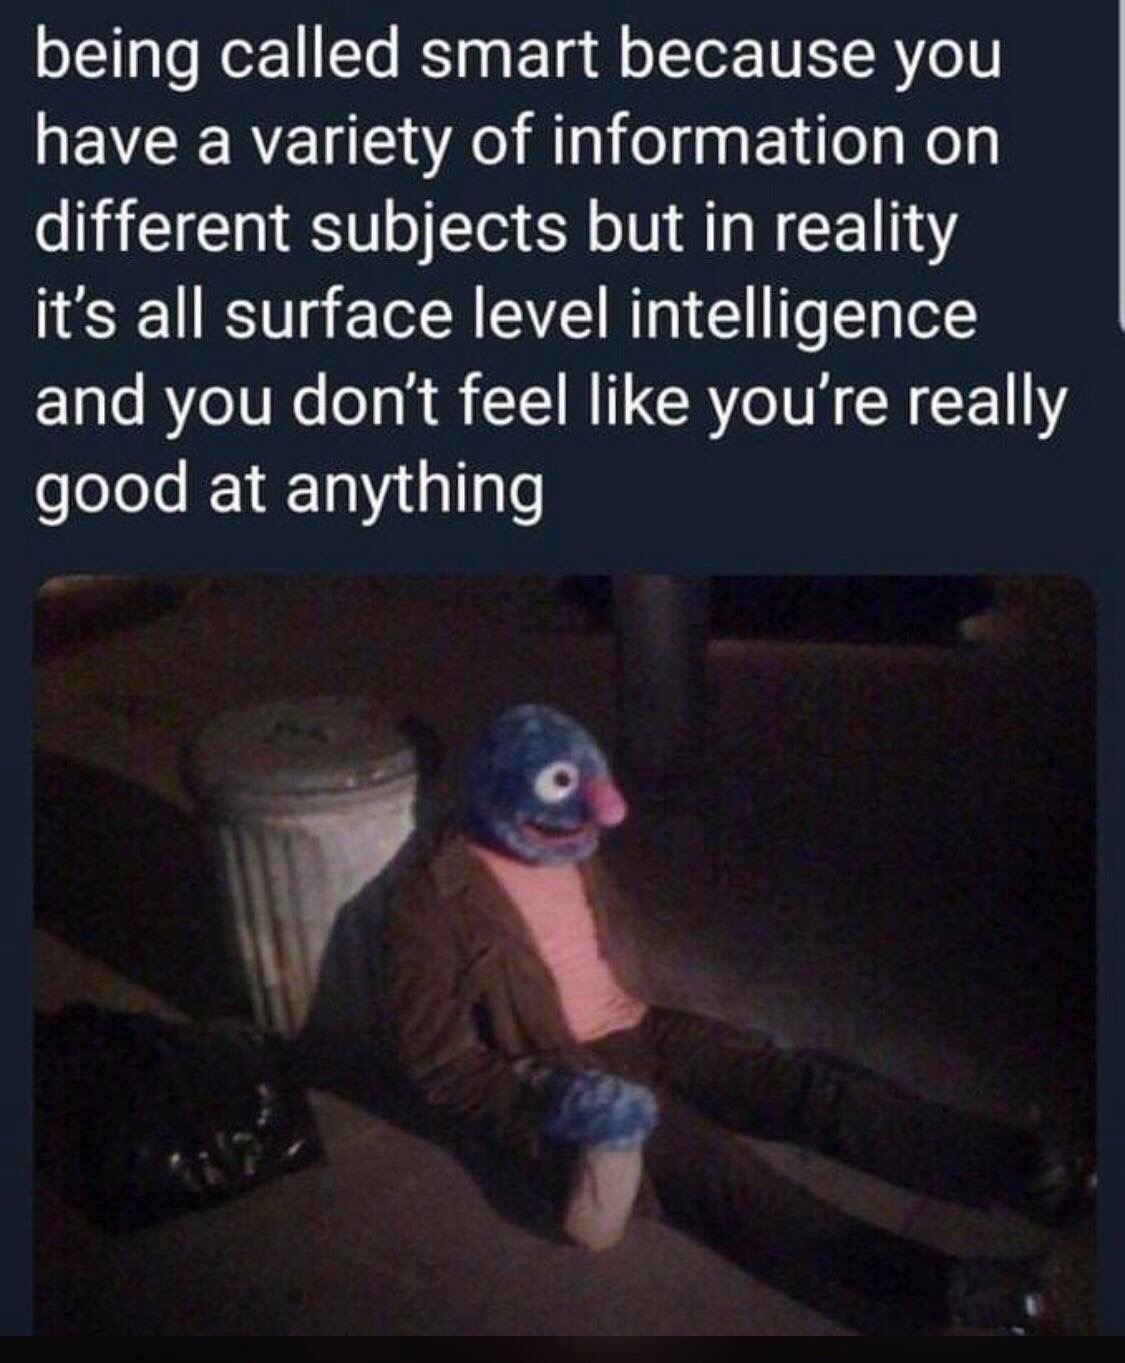 being called smart because you have a variety of information - being called smart because you have a variety of information on different subjects but in reality it's all surface level intelligence and you don't feel you're really good at anything